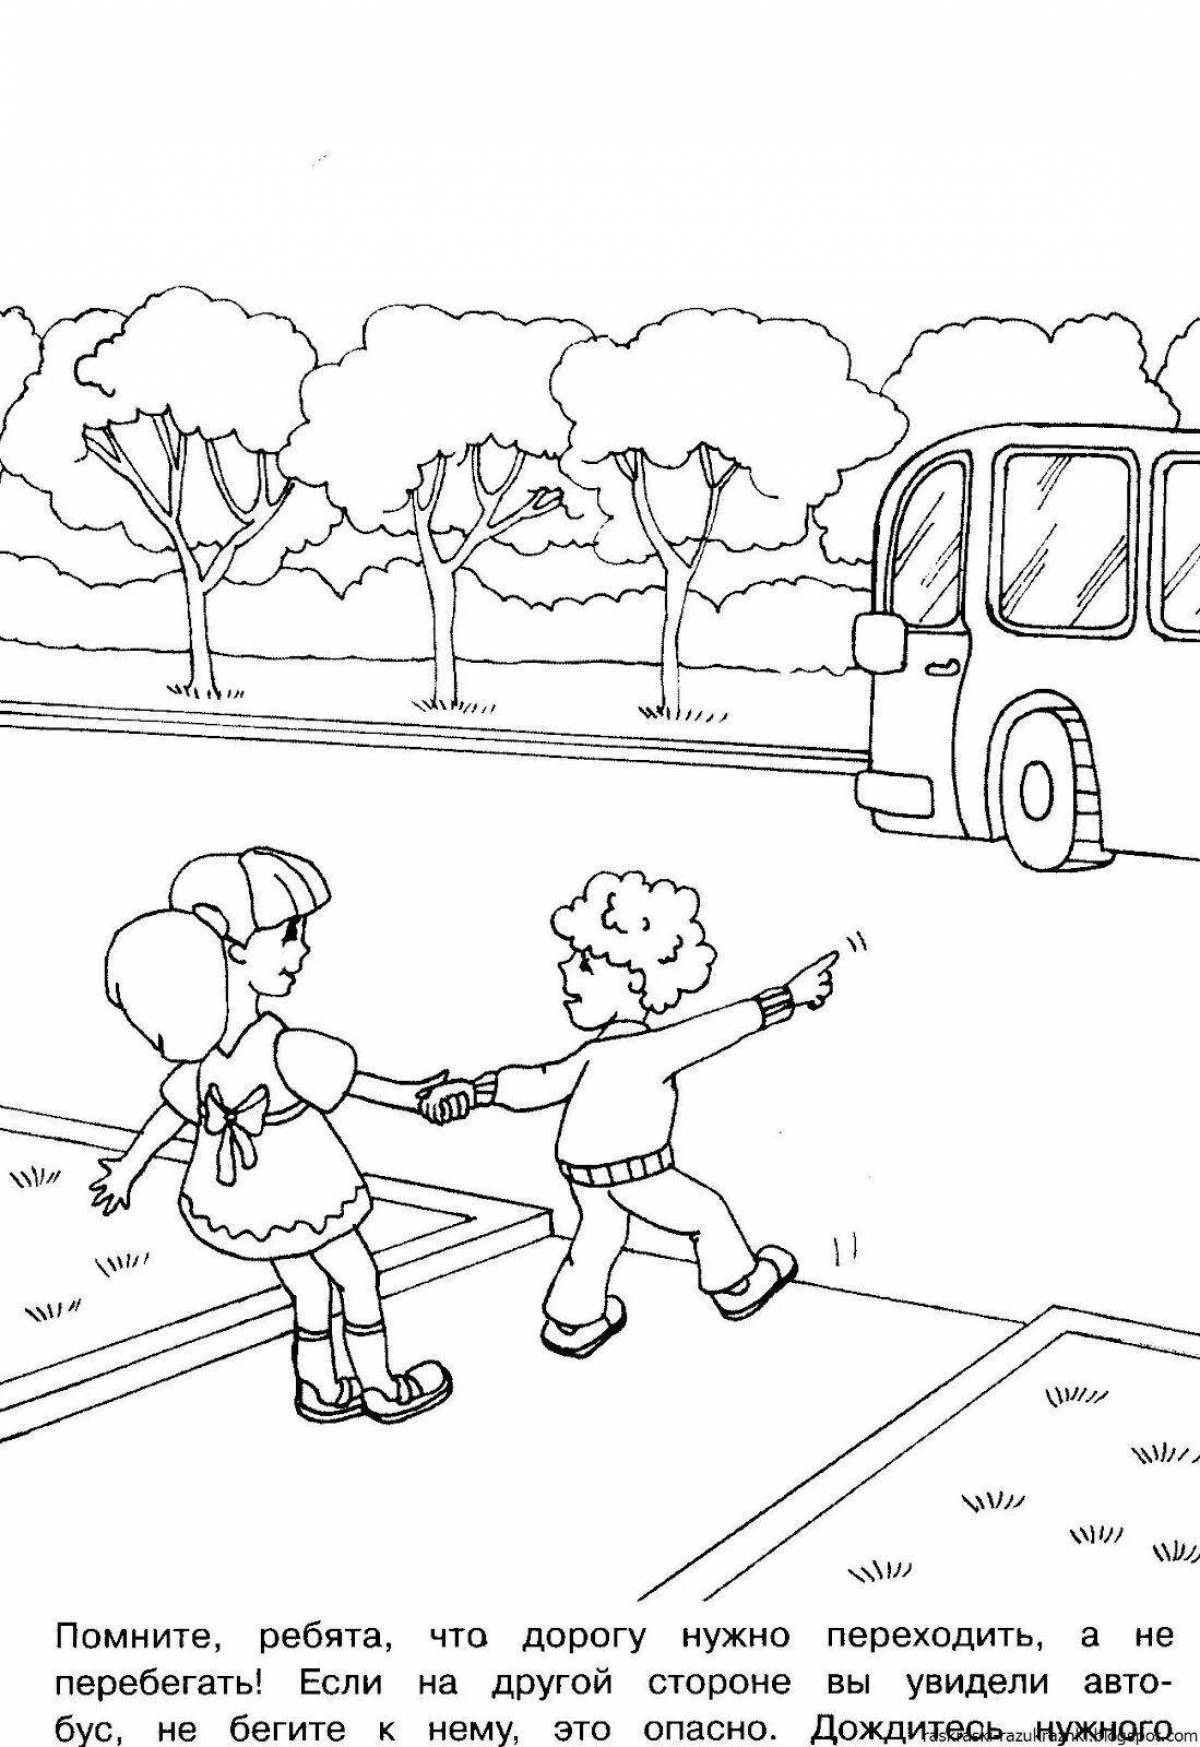 Colorful rules of the road coloring book for schoolchildren